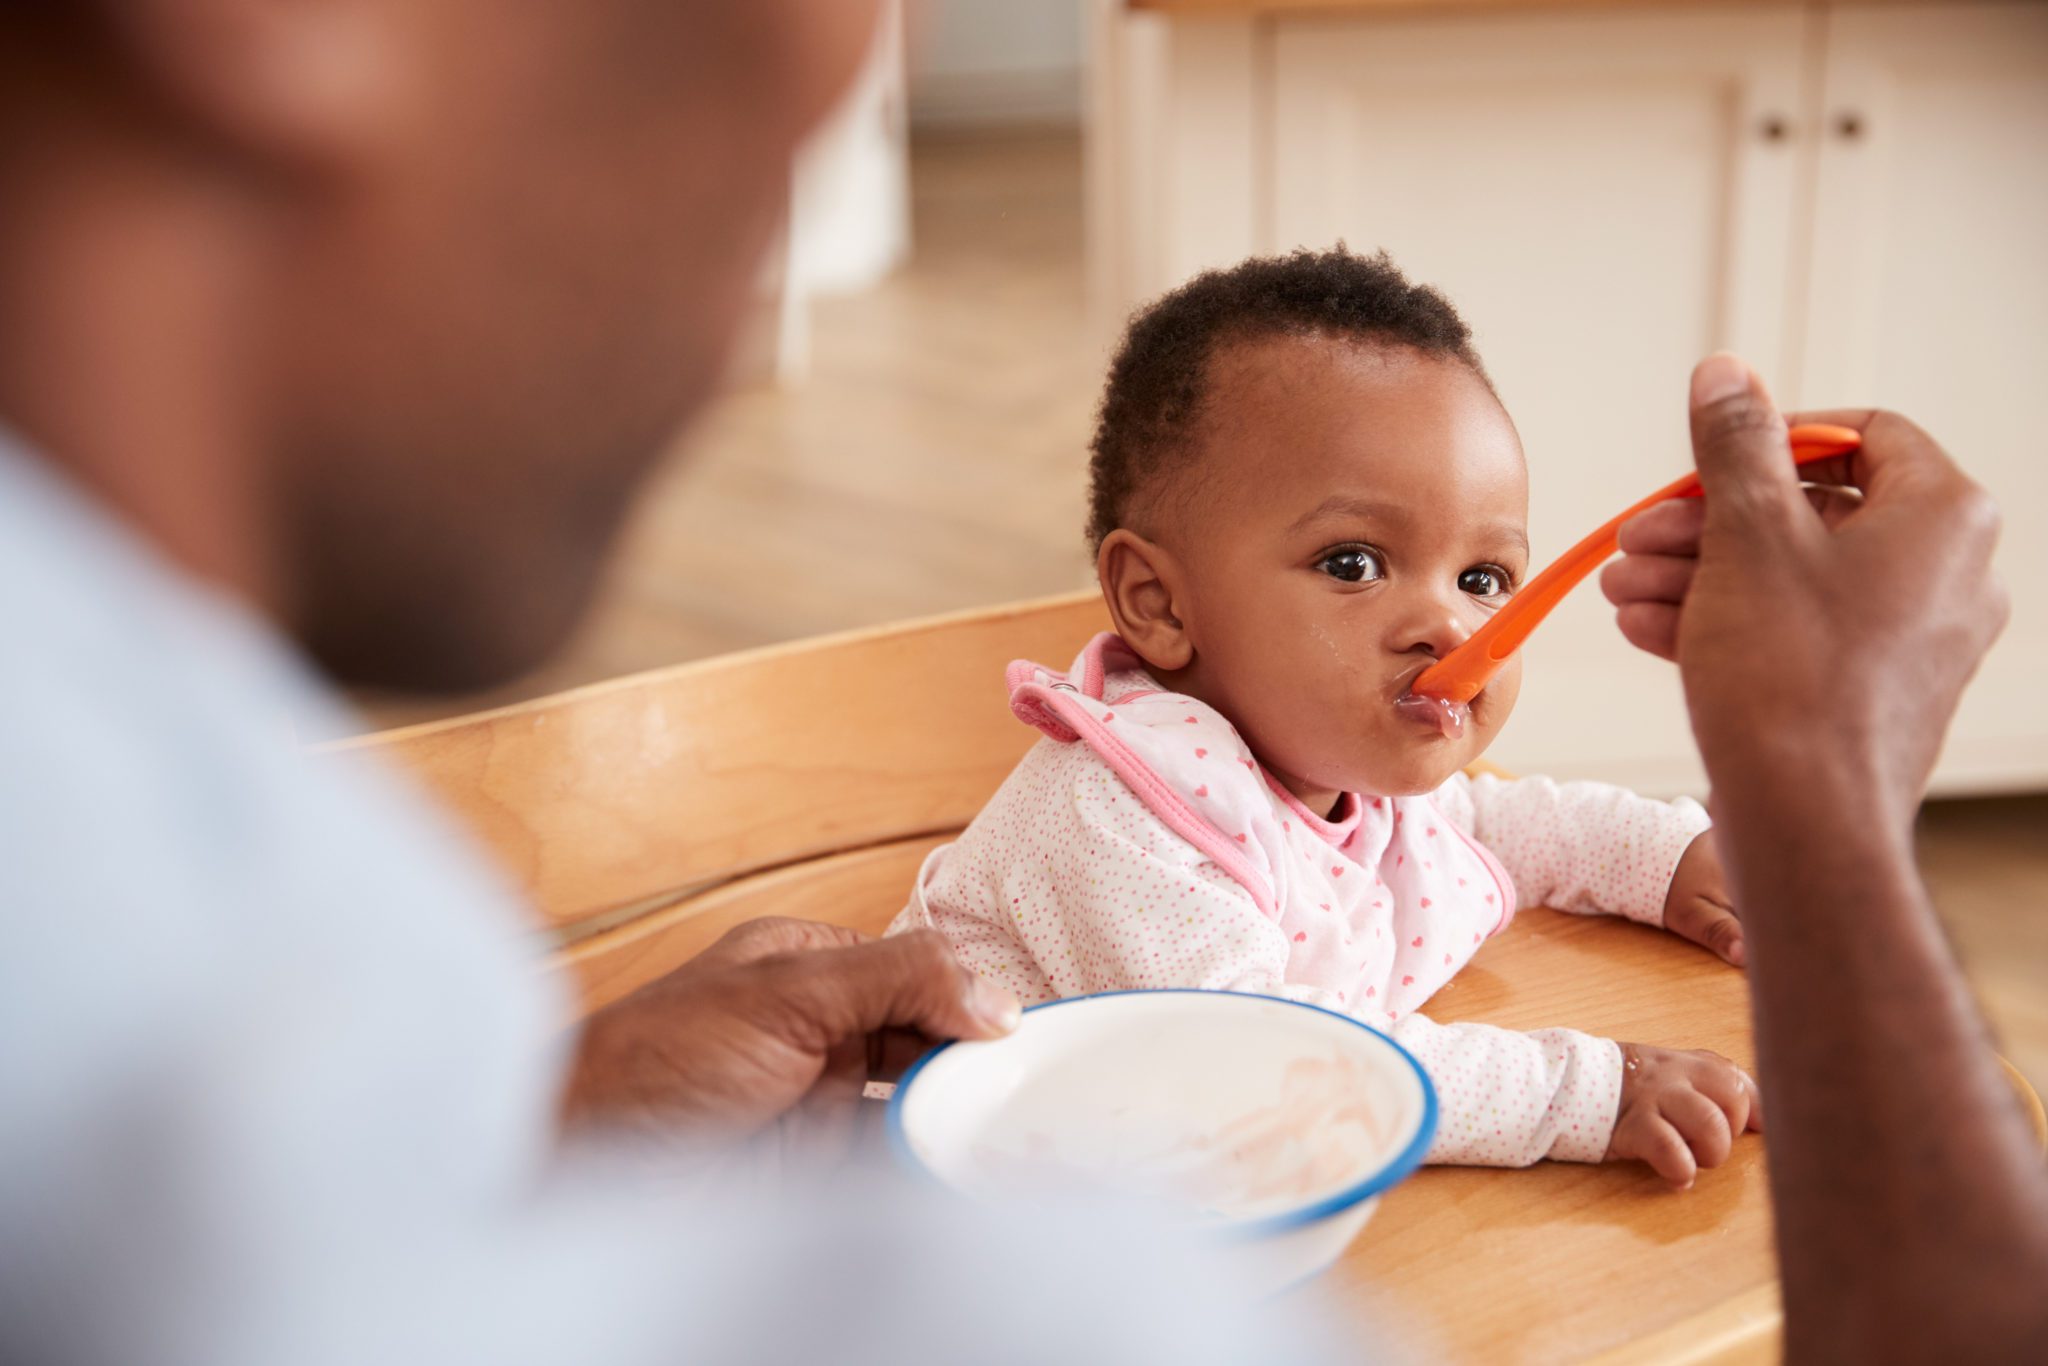 Weaning: How To Stop Breastfeeding When You & Your Child Are Ready